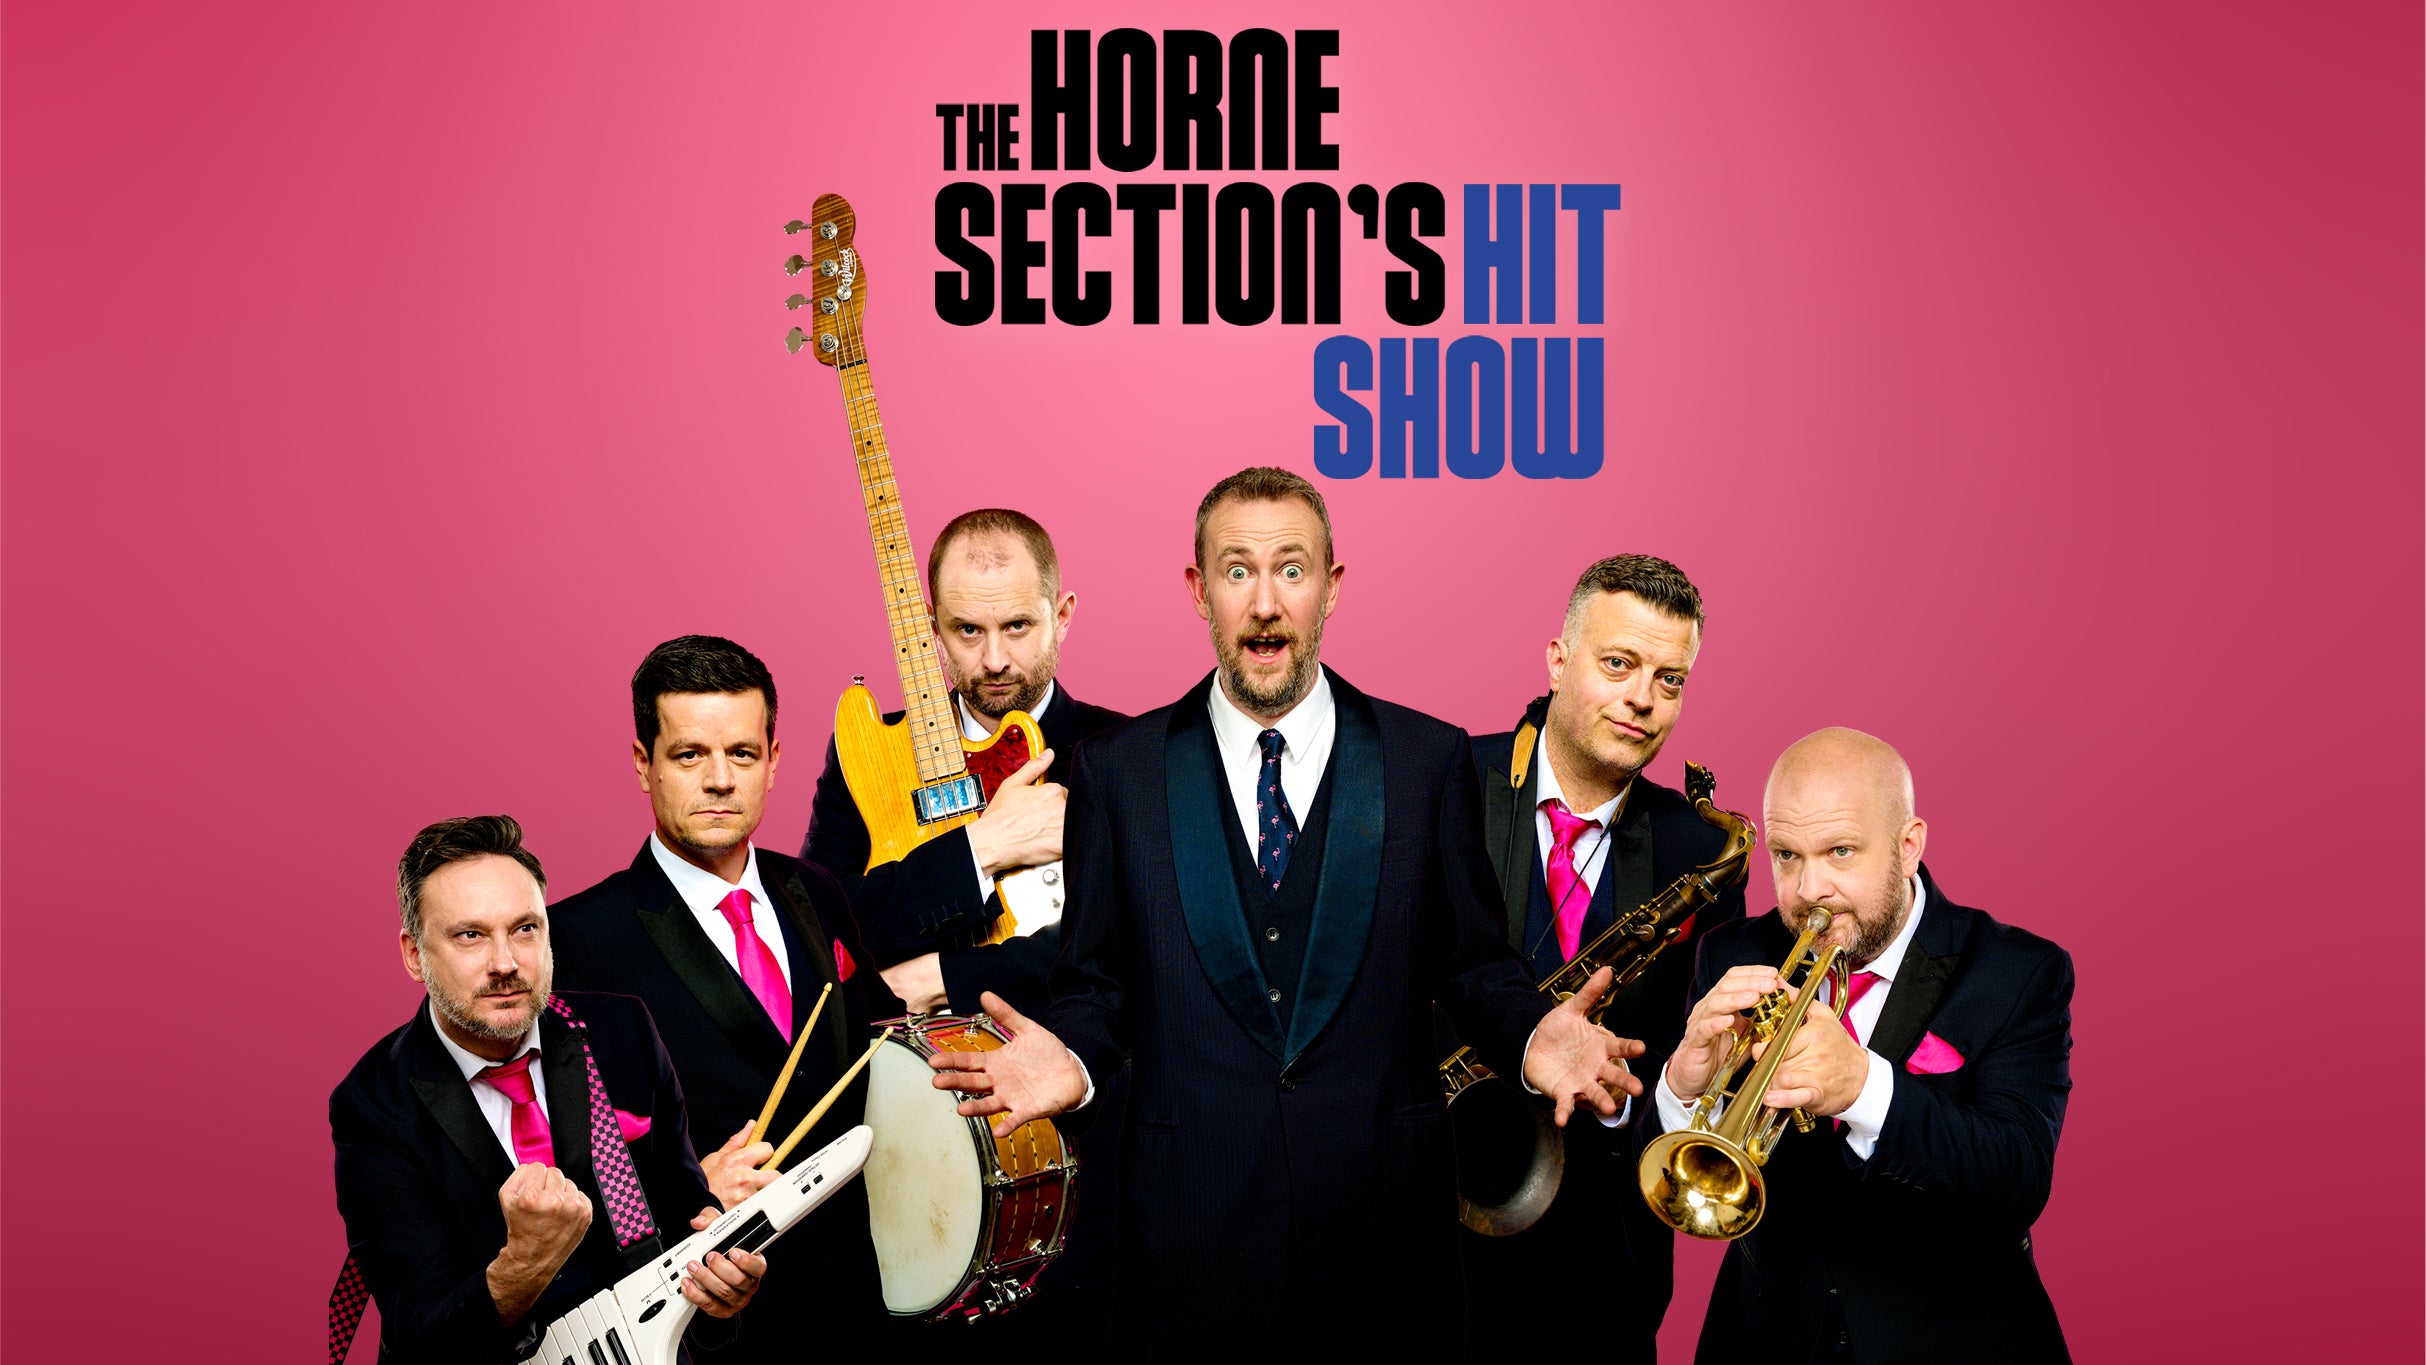 The Horne Section's Hit Show Event Title Pic